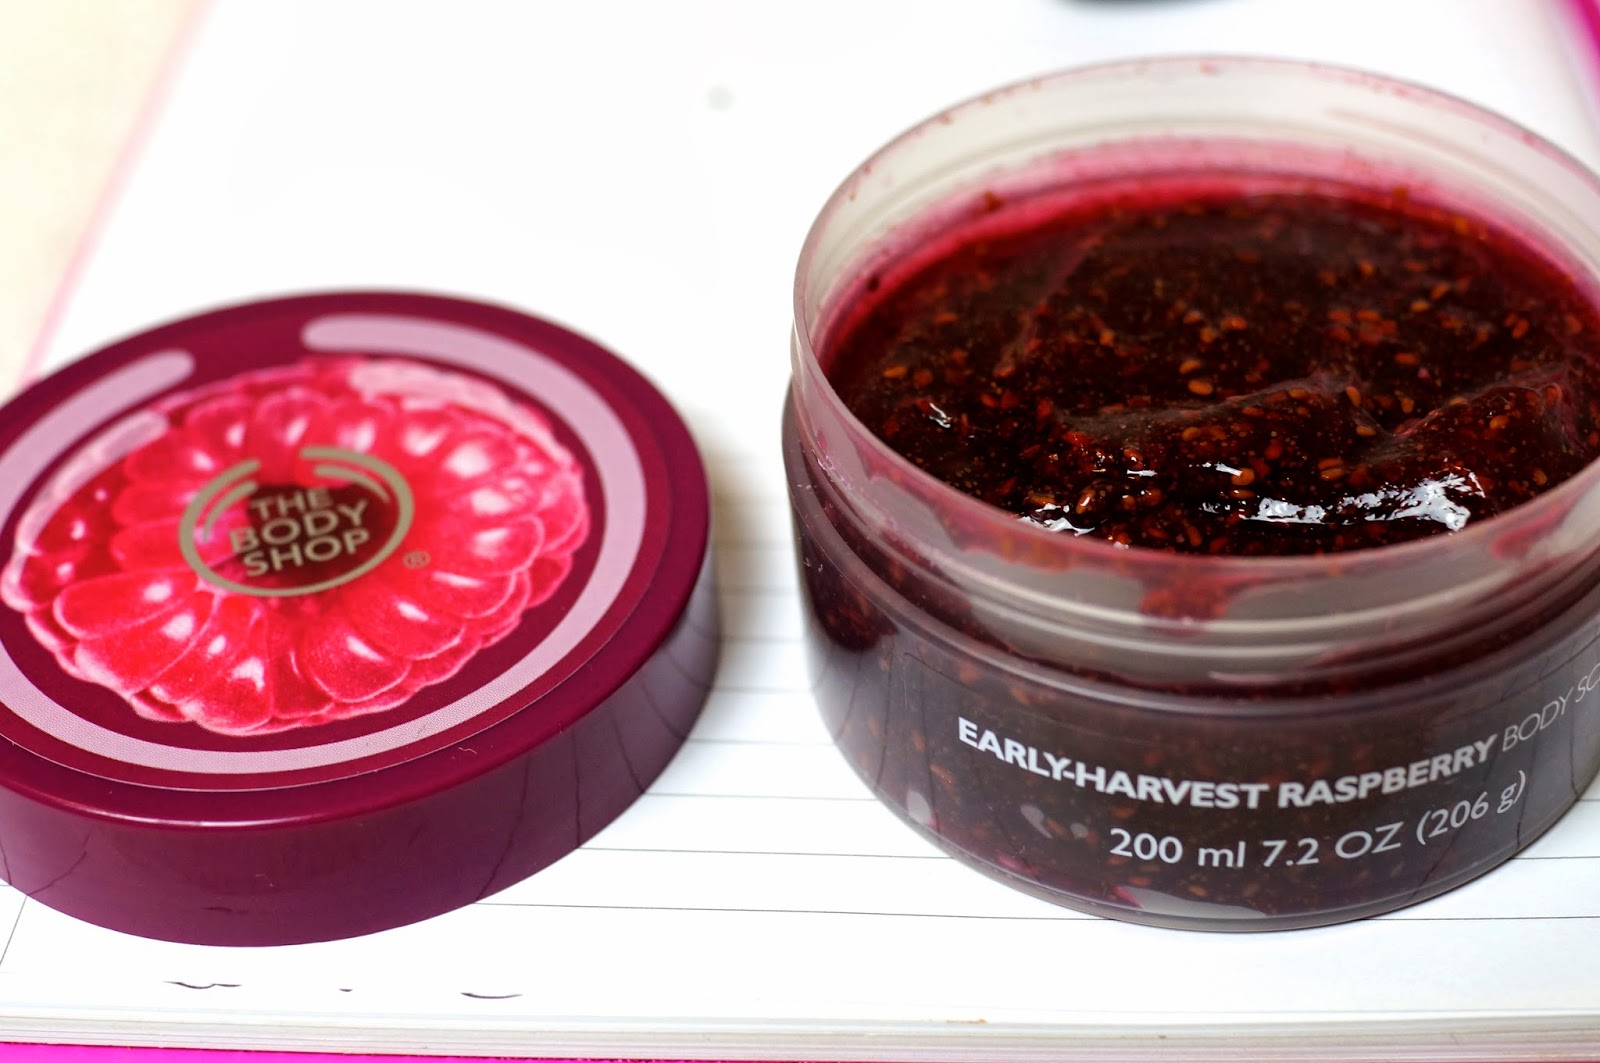 The Body Shop Early-Harvest Raspberry Body Wash